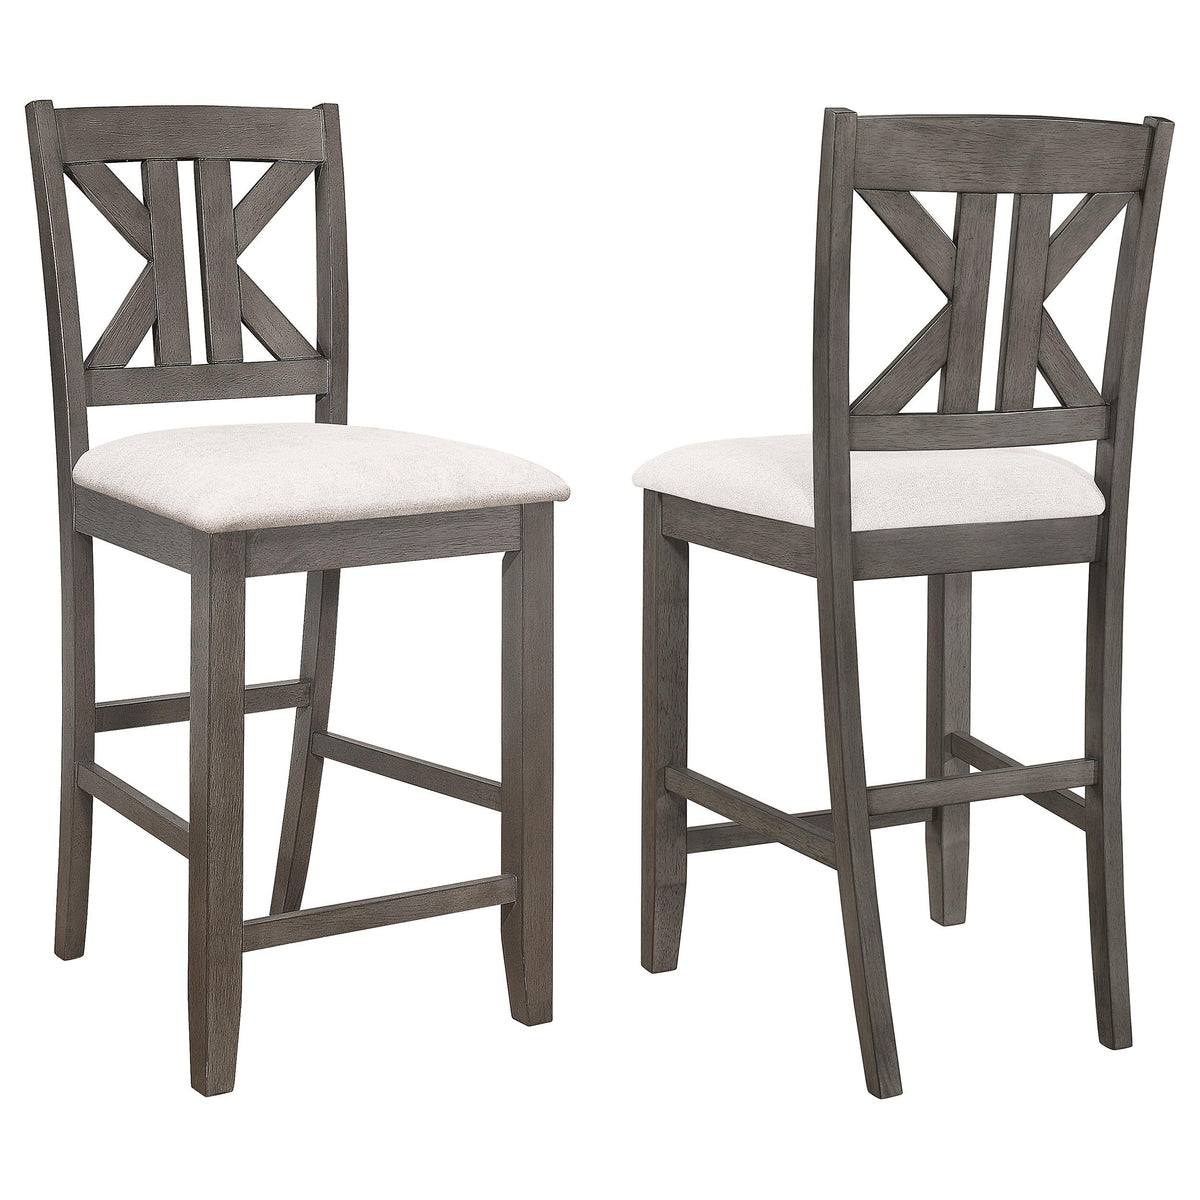 Athens Upholstered Seat Counter Height Stools Light Tan (Set of 2)  Half Price Furniture